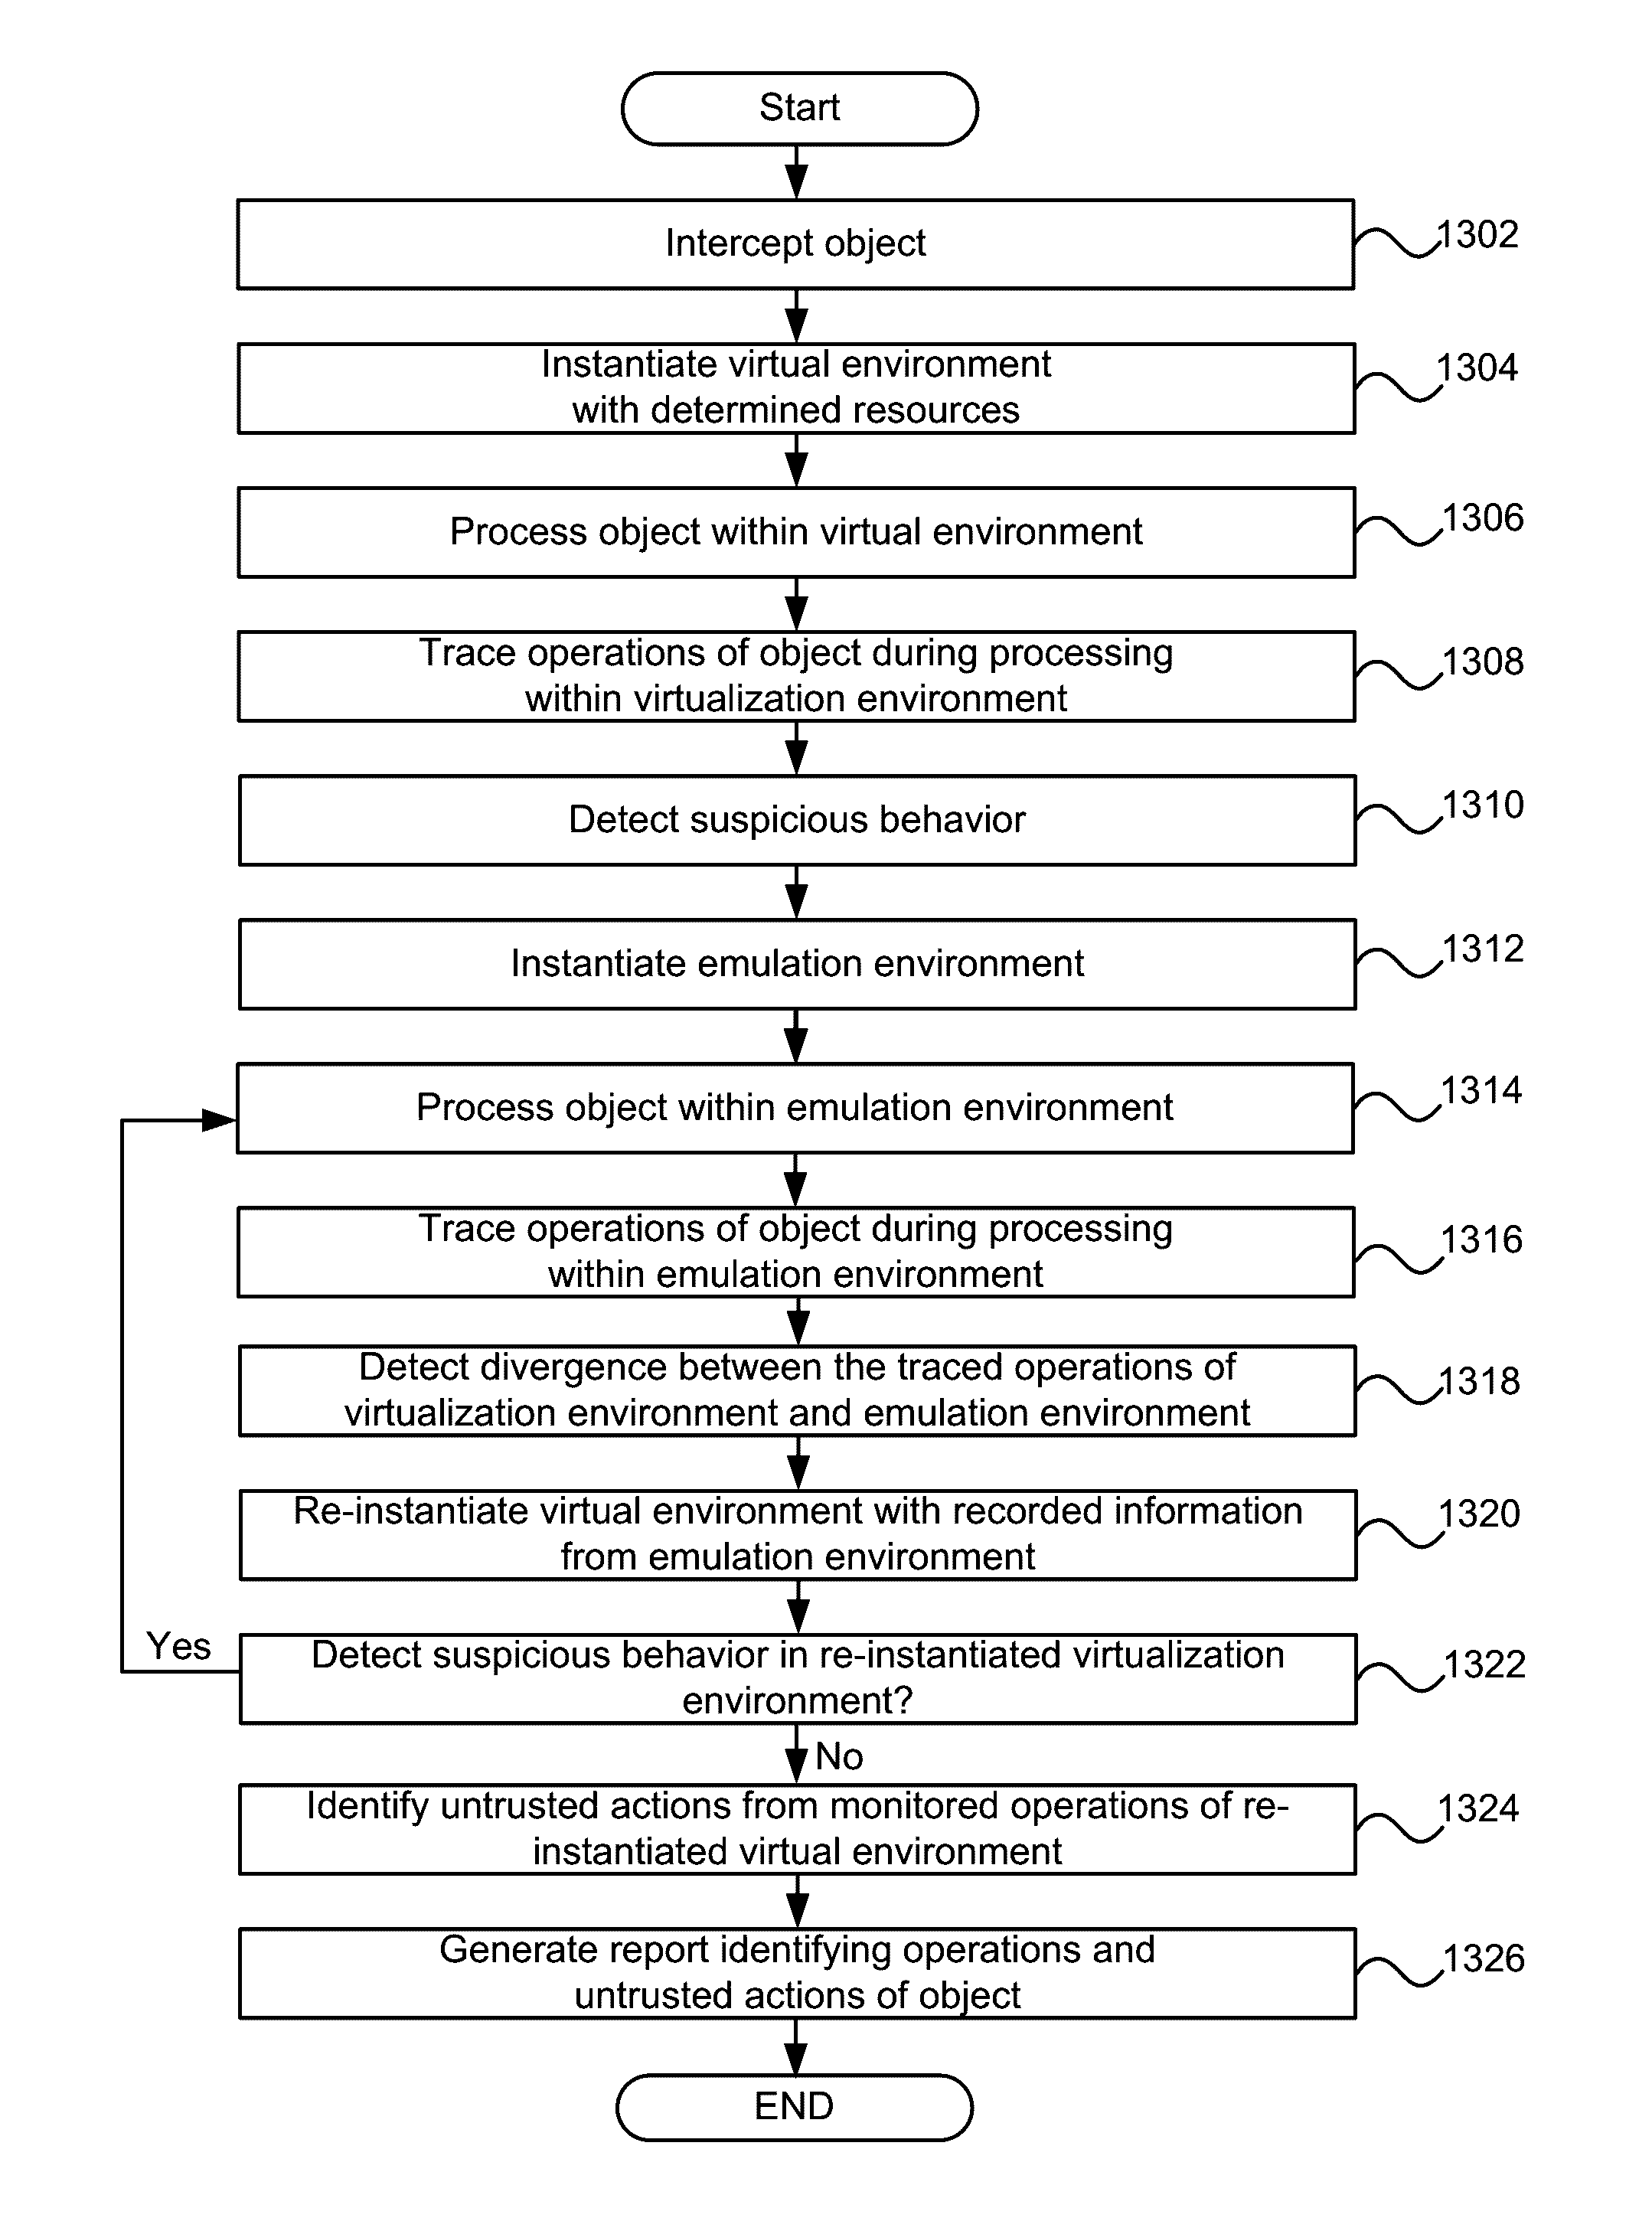 Systems and methods for virtualization and emulation assisted malware detection